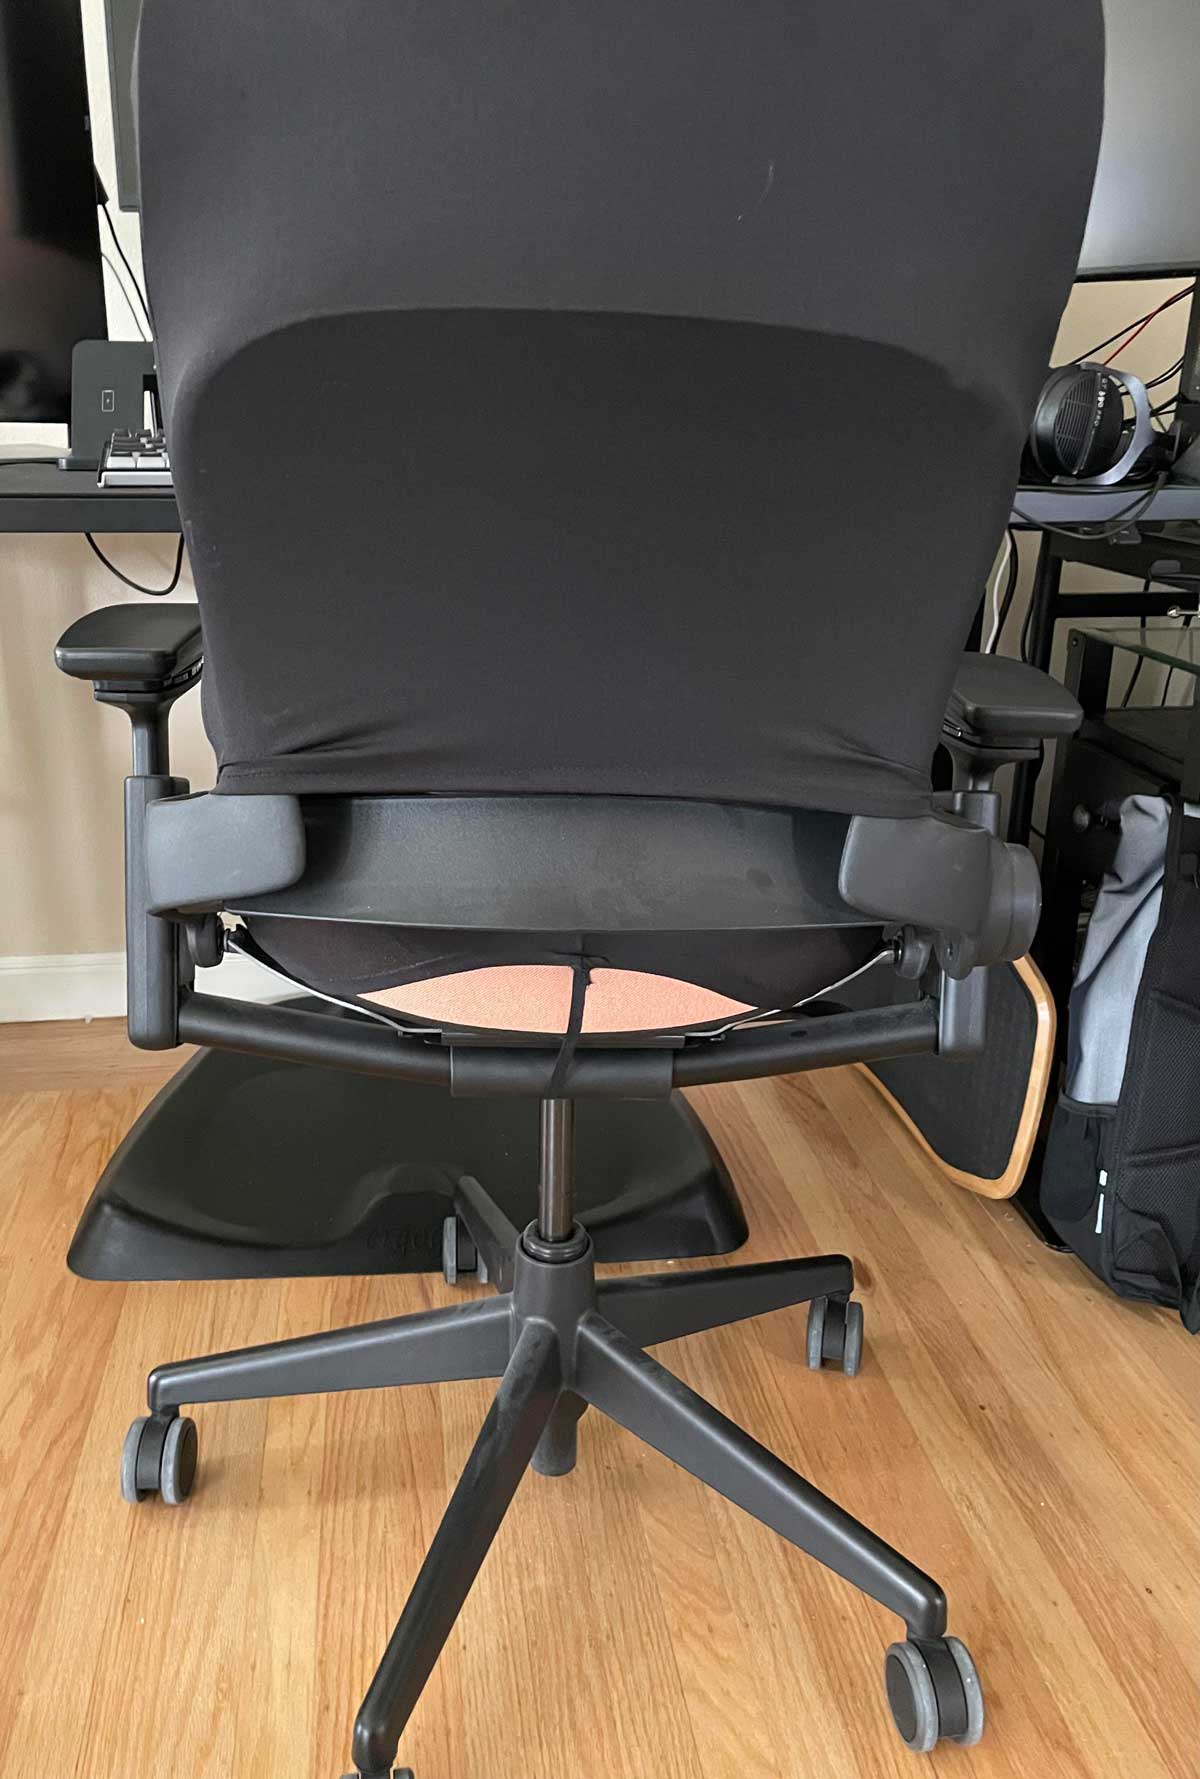 My husband got a free ergonomic chair, the downside being peach color fabric. He got black covers to go on it and accidentally gave himself perma plumbers crack